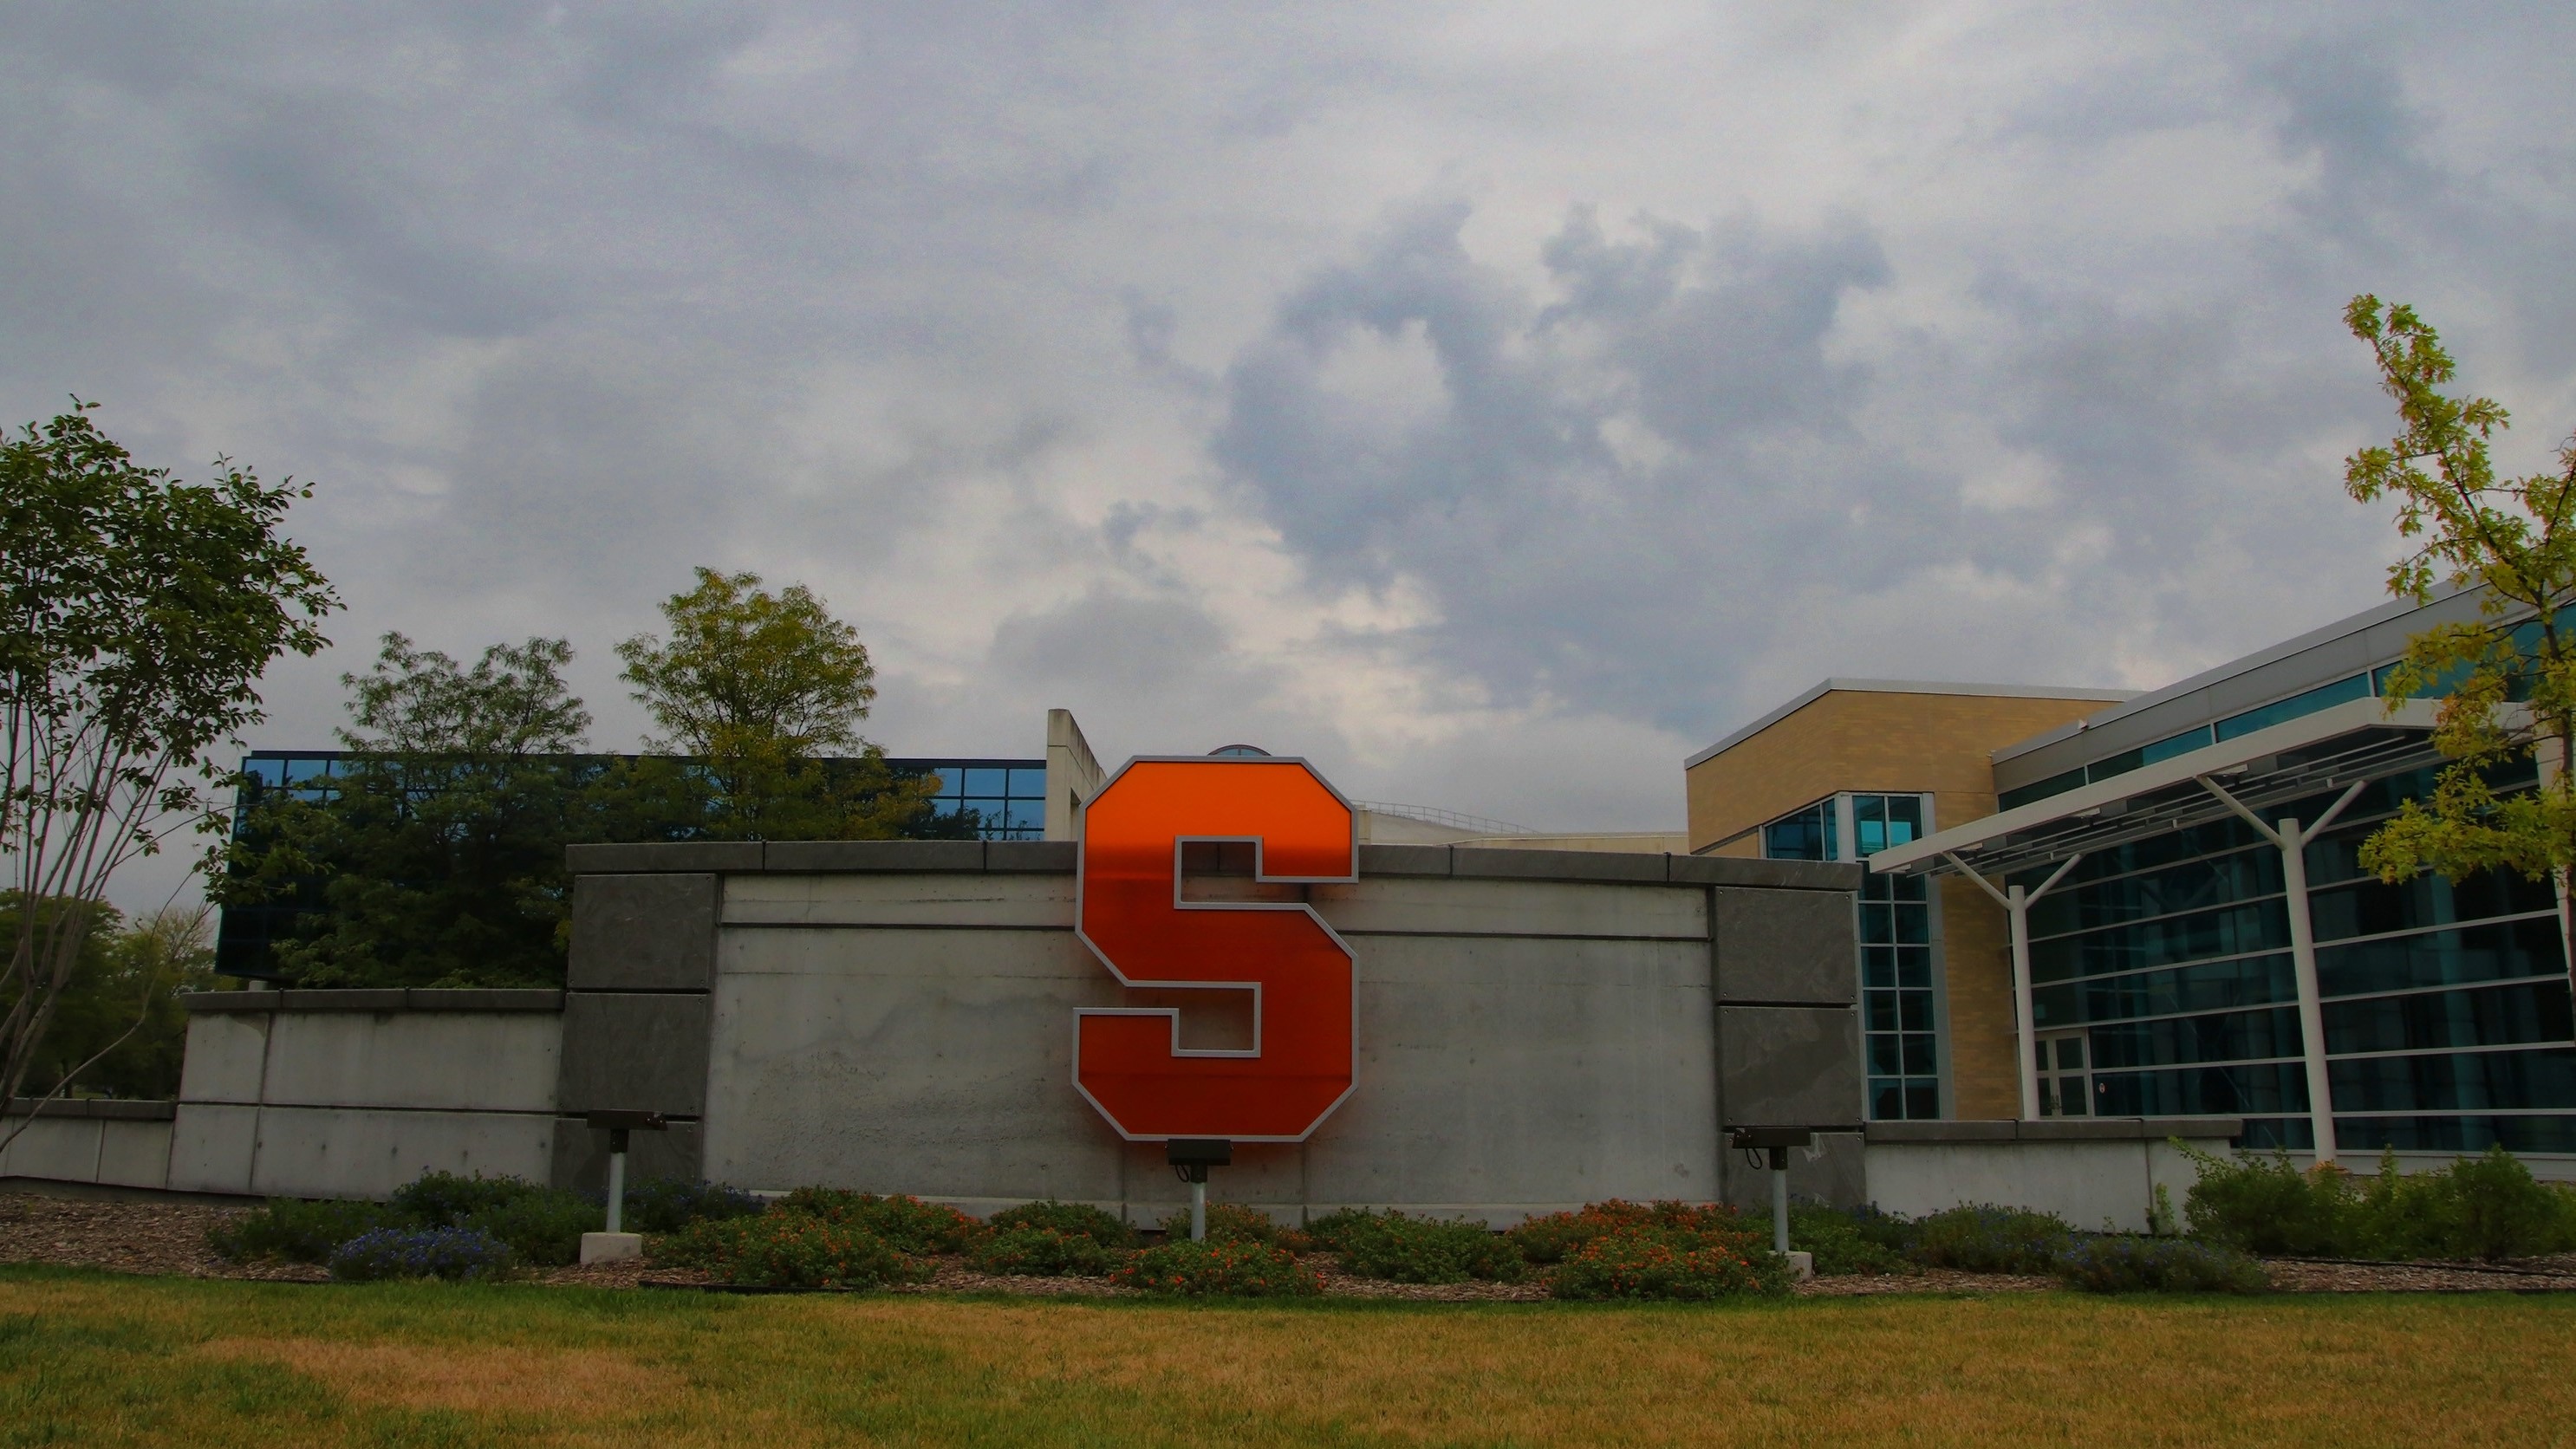 Syracuse White Supremacist Manifesto Likely Hoax: Chancellor